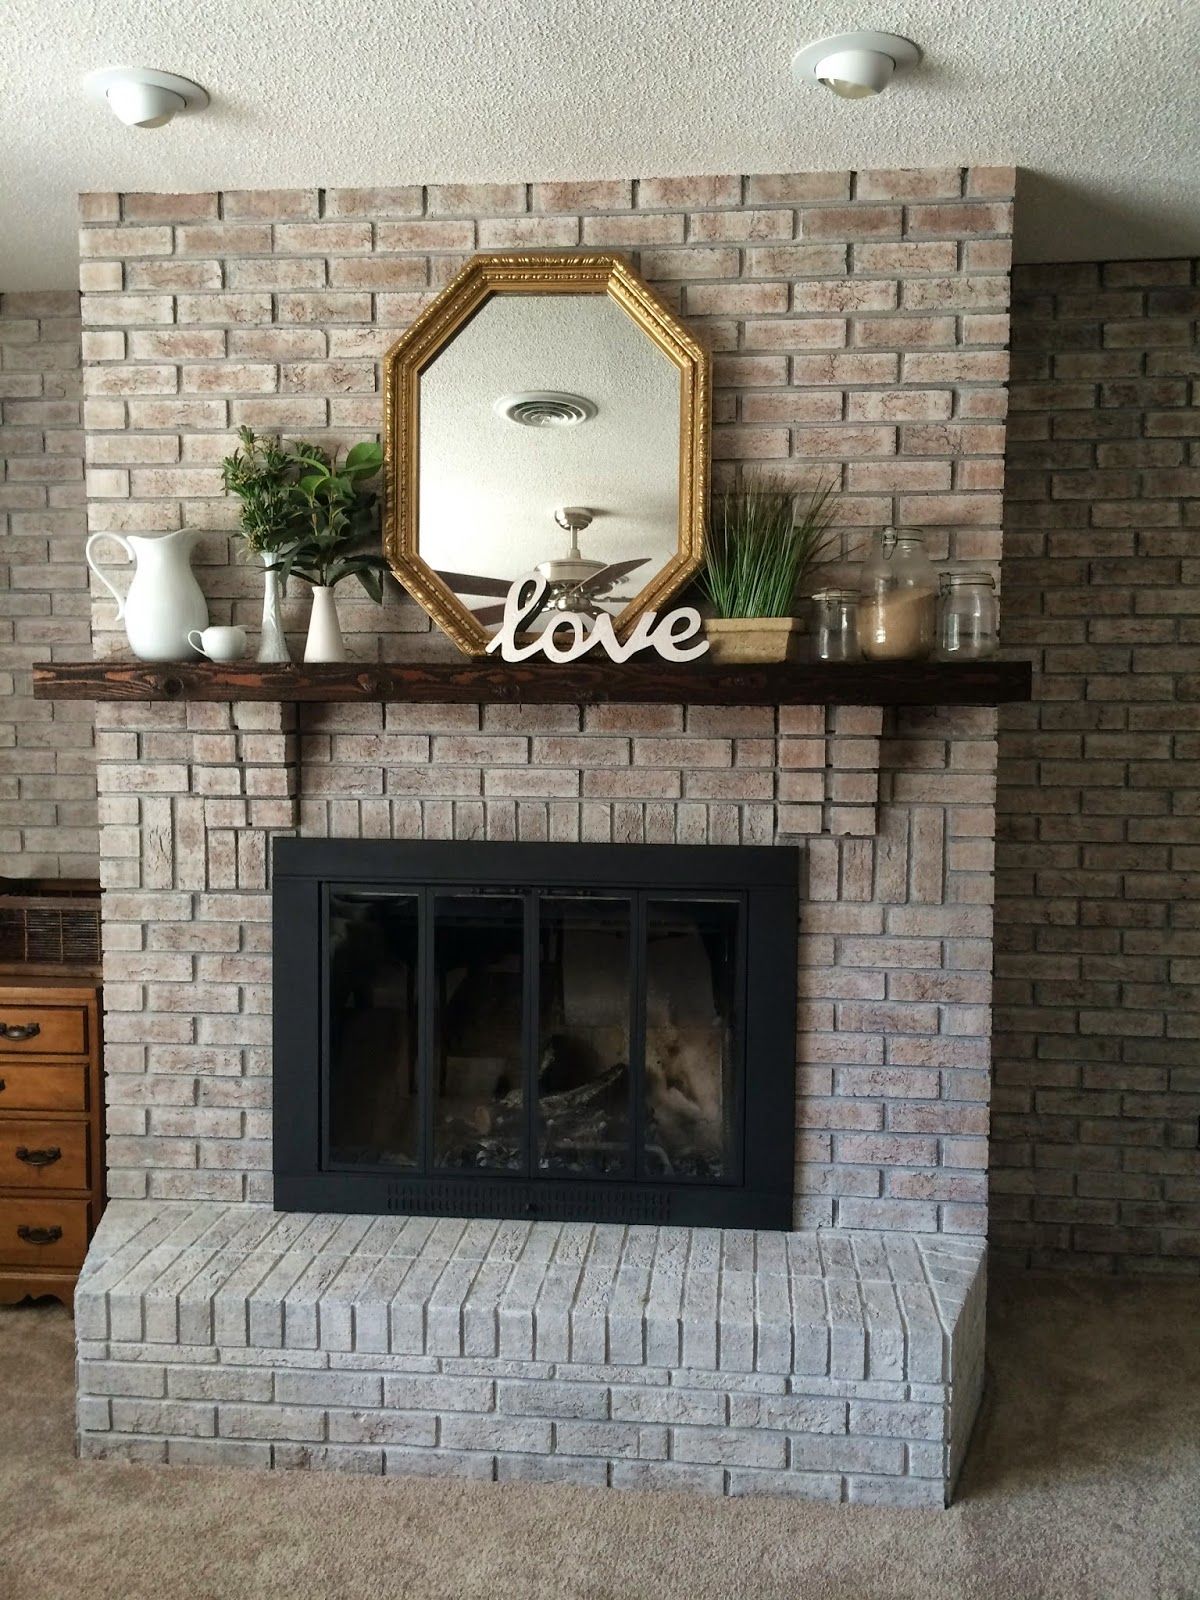 Painting Interior Brick Fireplace Best Of White Washing Brick with Gray Beige Walking with Dancers